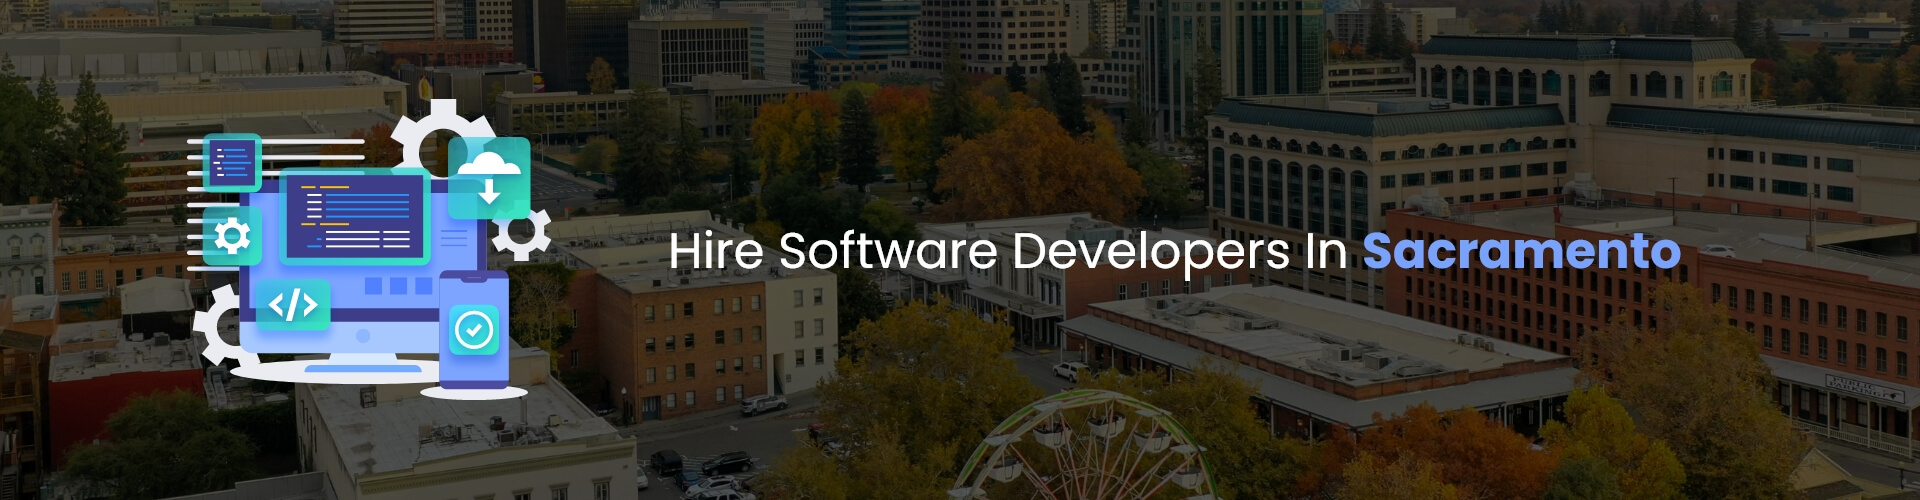 hire software developers in sacramento